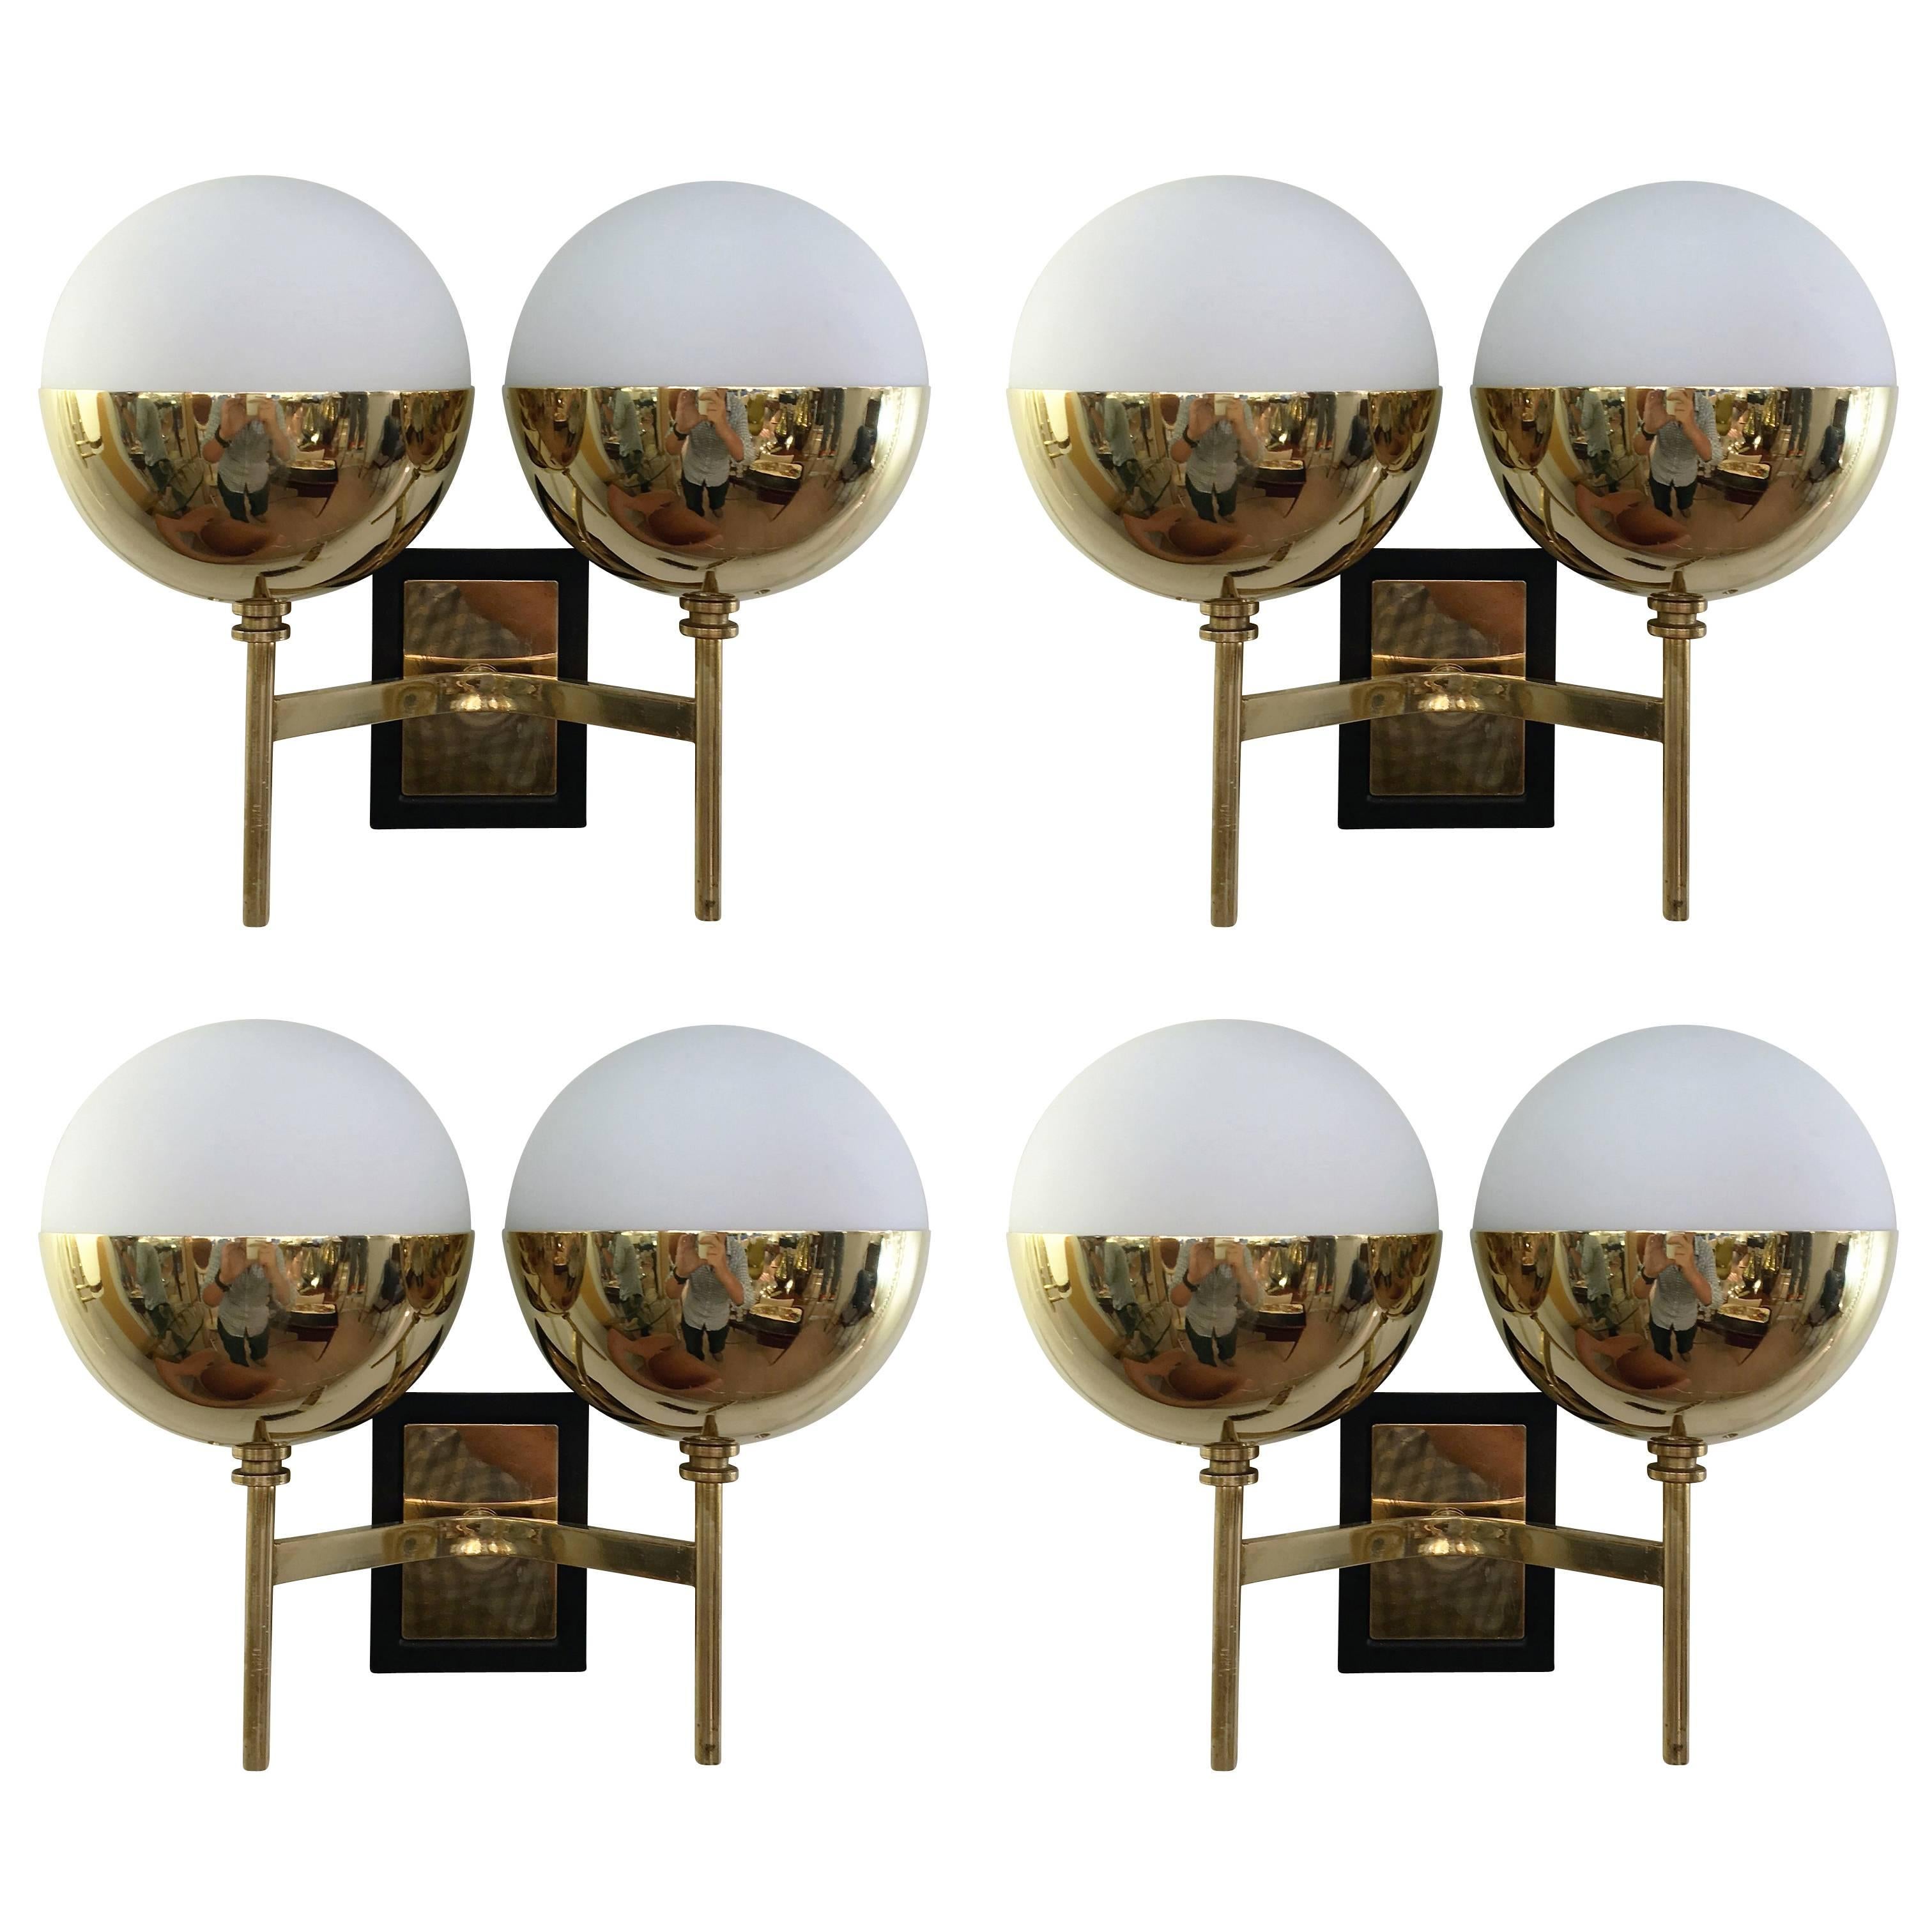 Two Pairs of Diminutive Stilnovo Style Sconces, Italy, 1960s